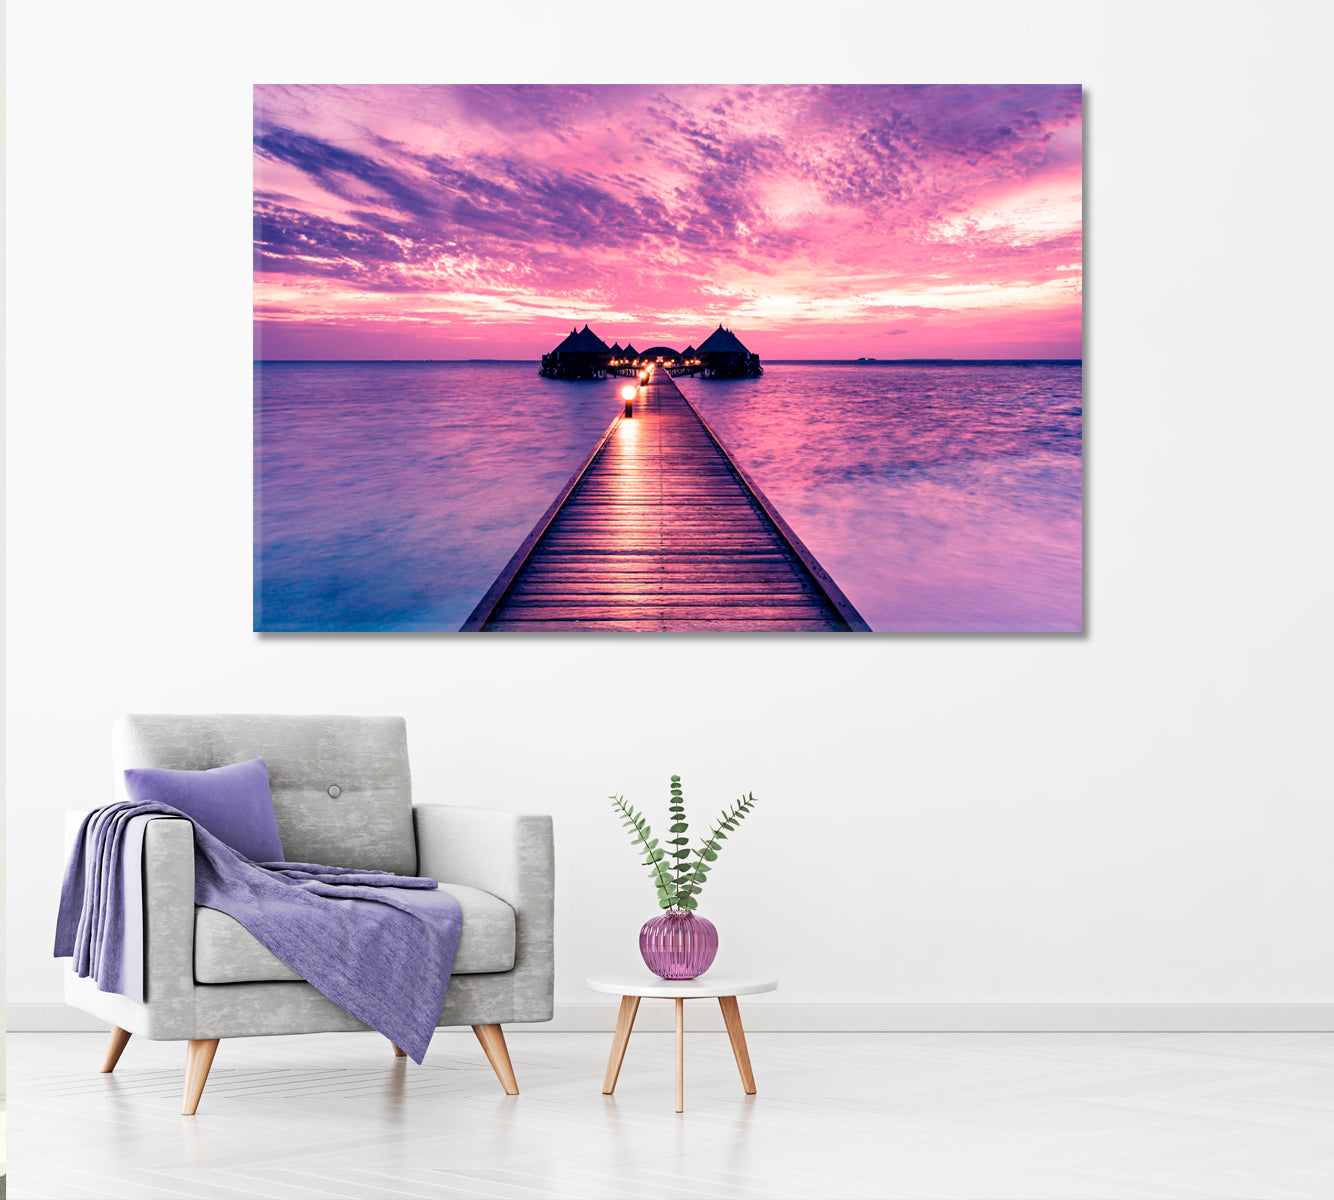 Purple Sunset in Maldives Canvas Print ArtLexy 1 Panel 24"x16" inches 